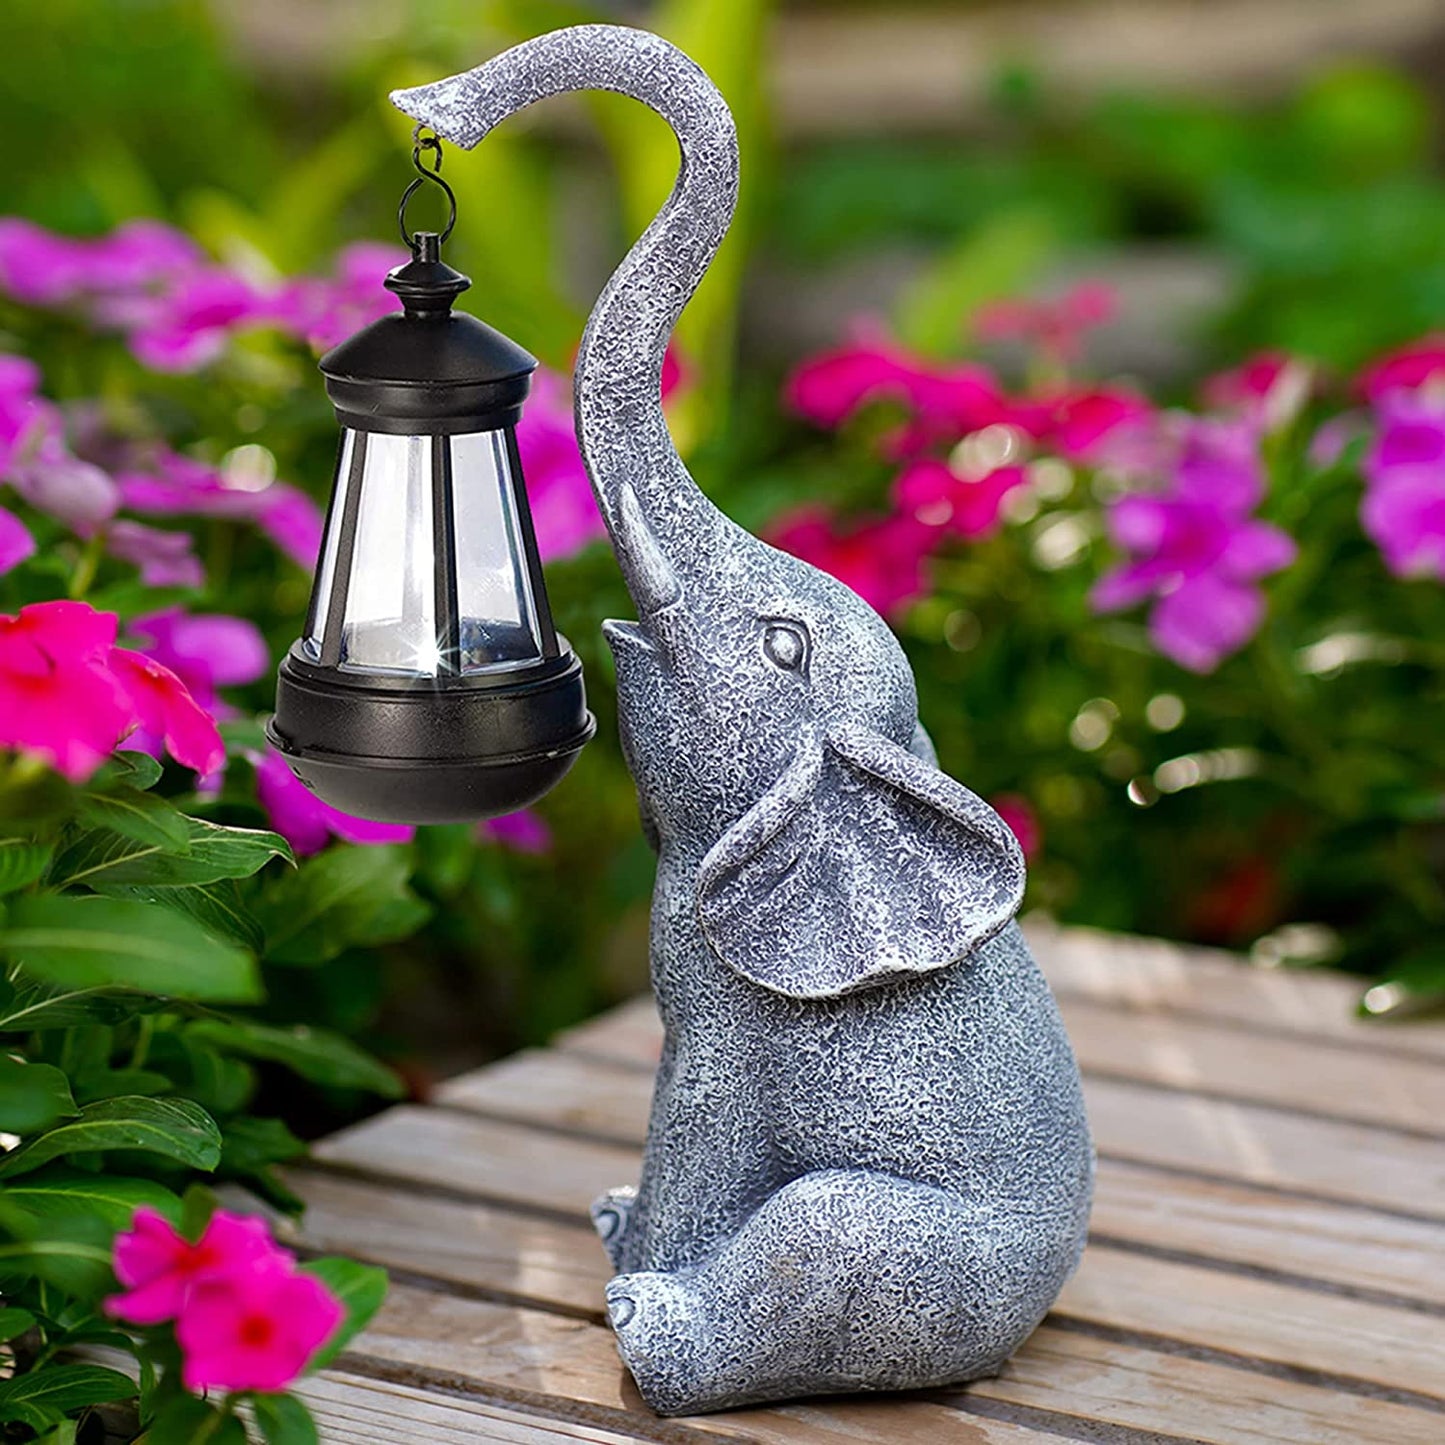 Elephant Garden Statue with Lamp